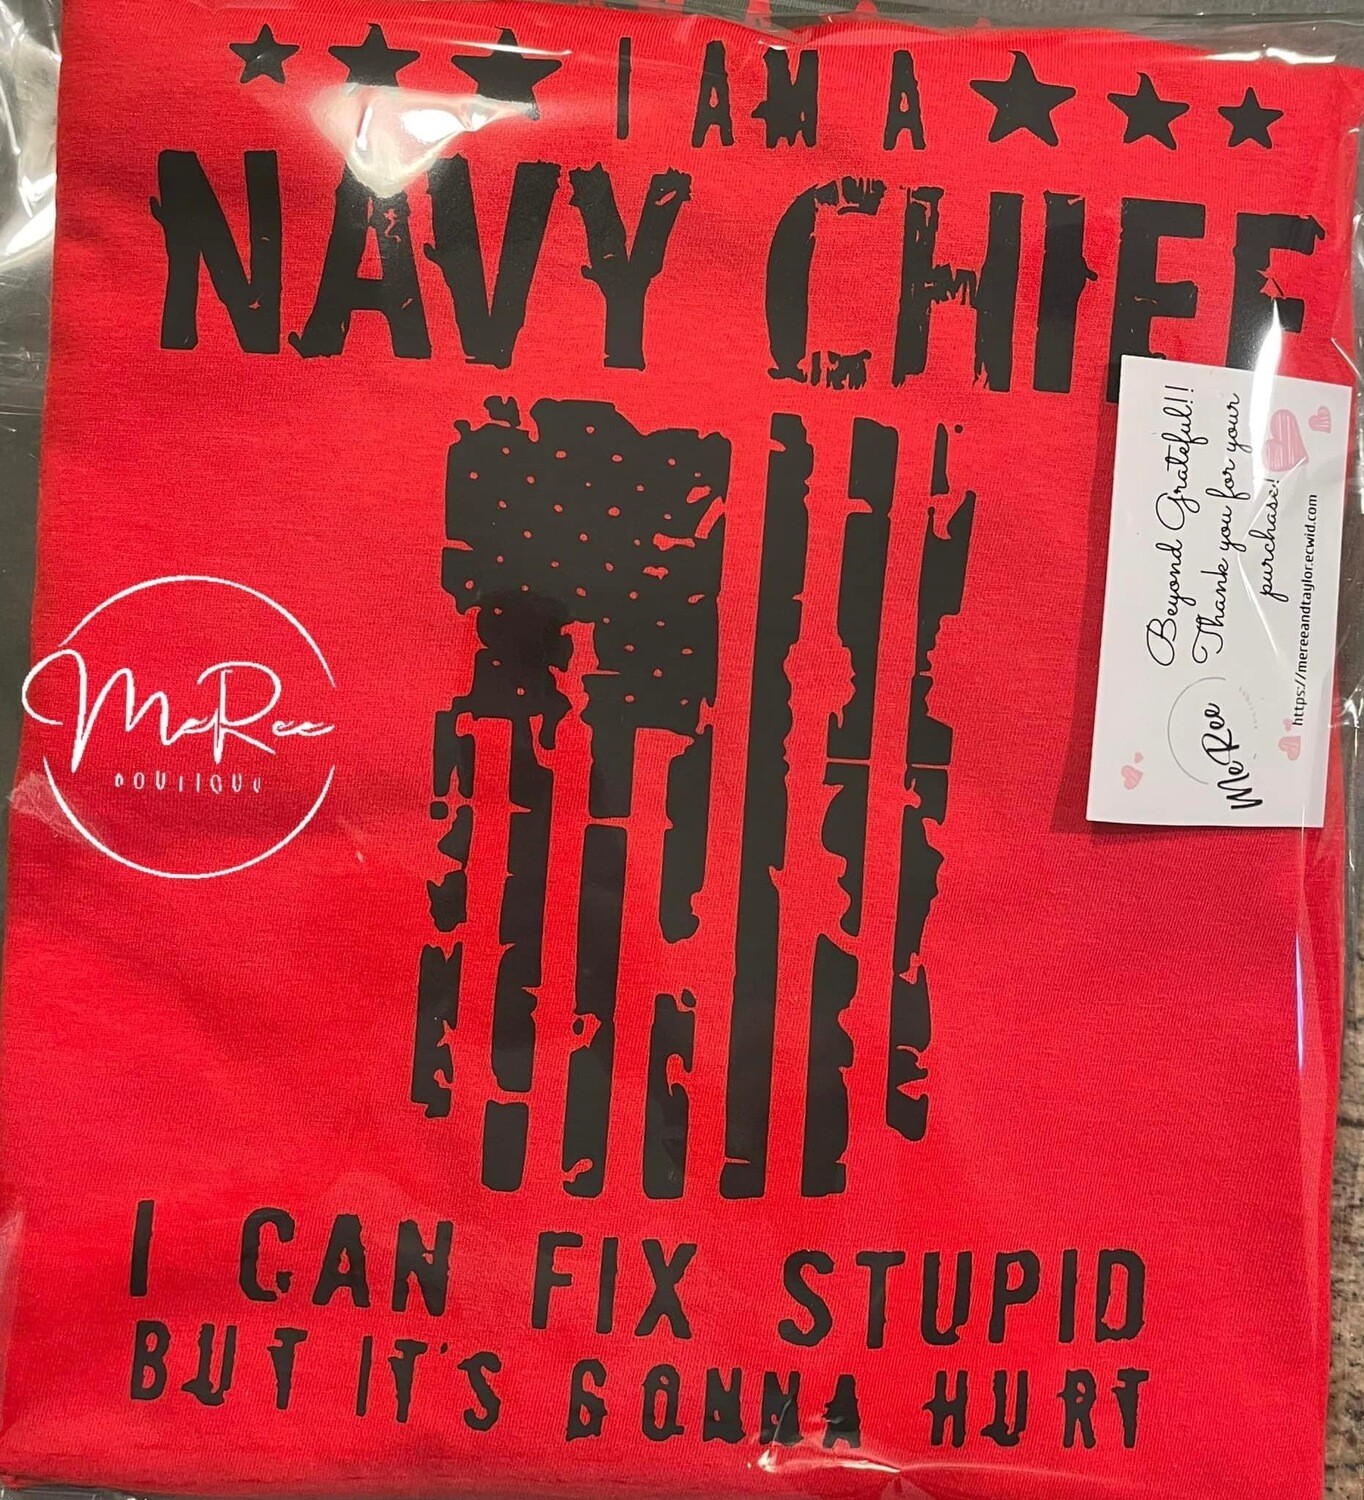 Vet/Warrant or Chief “FIX” T-Shirt (please allow 3-5 days to process, once ordered.)